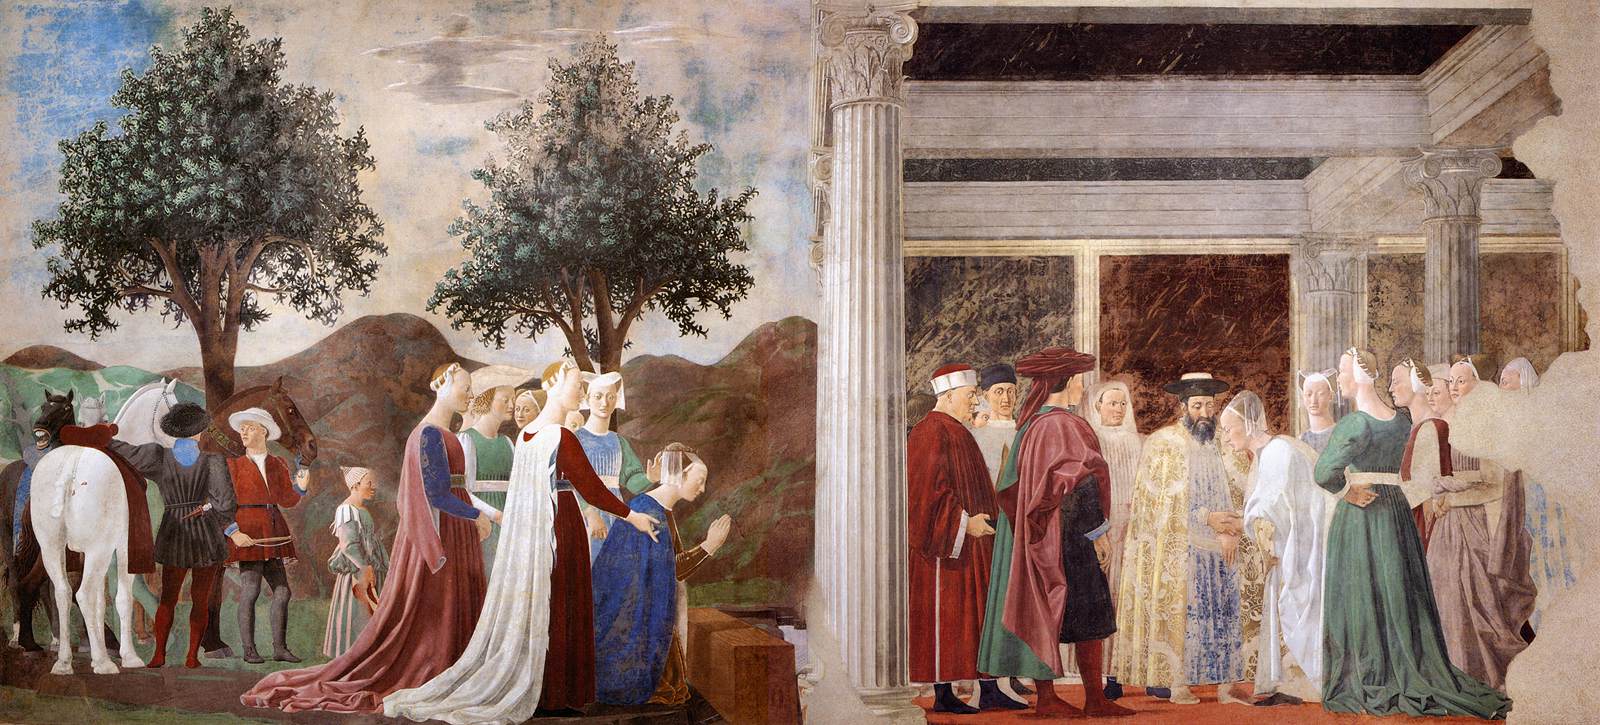 Piero della Francesca, the rational painter of the Renaissance: life and works